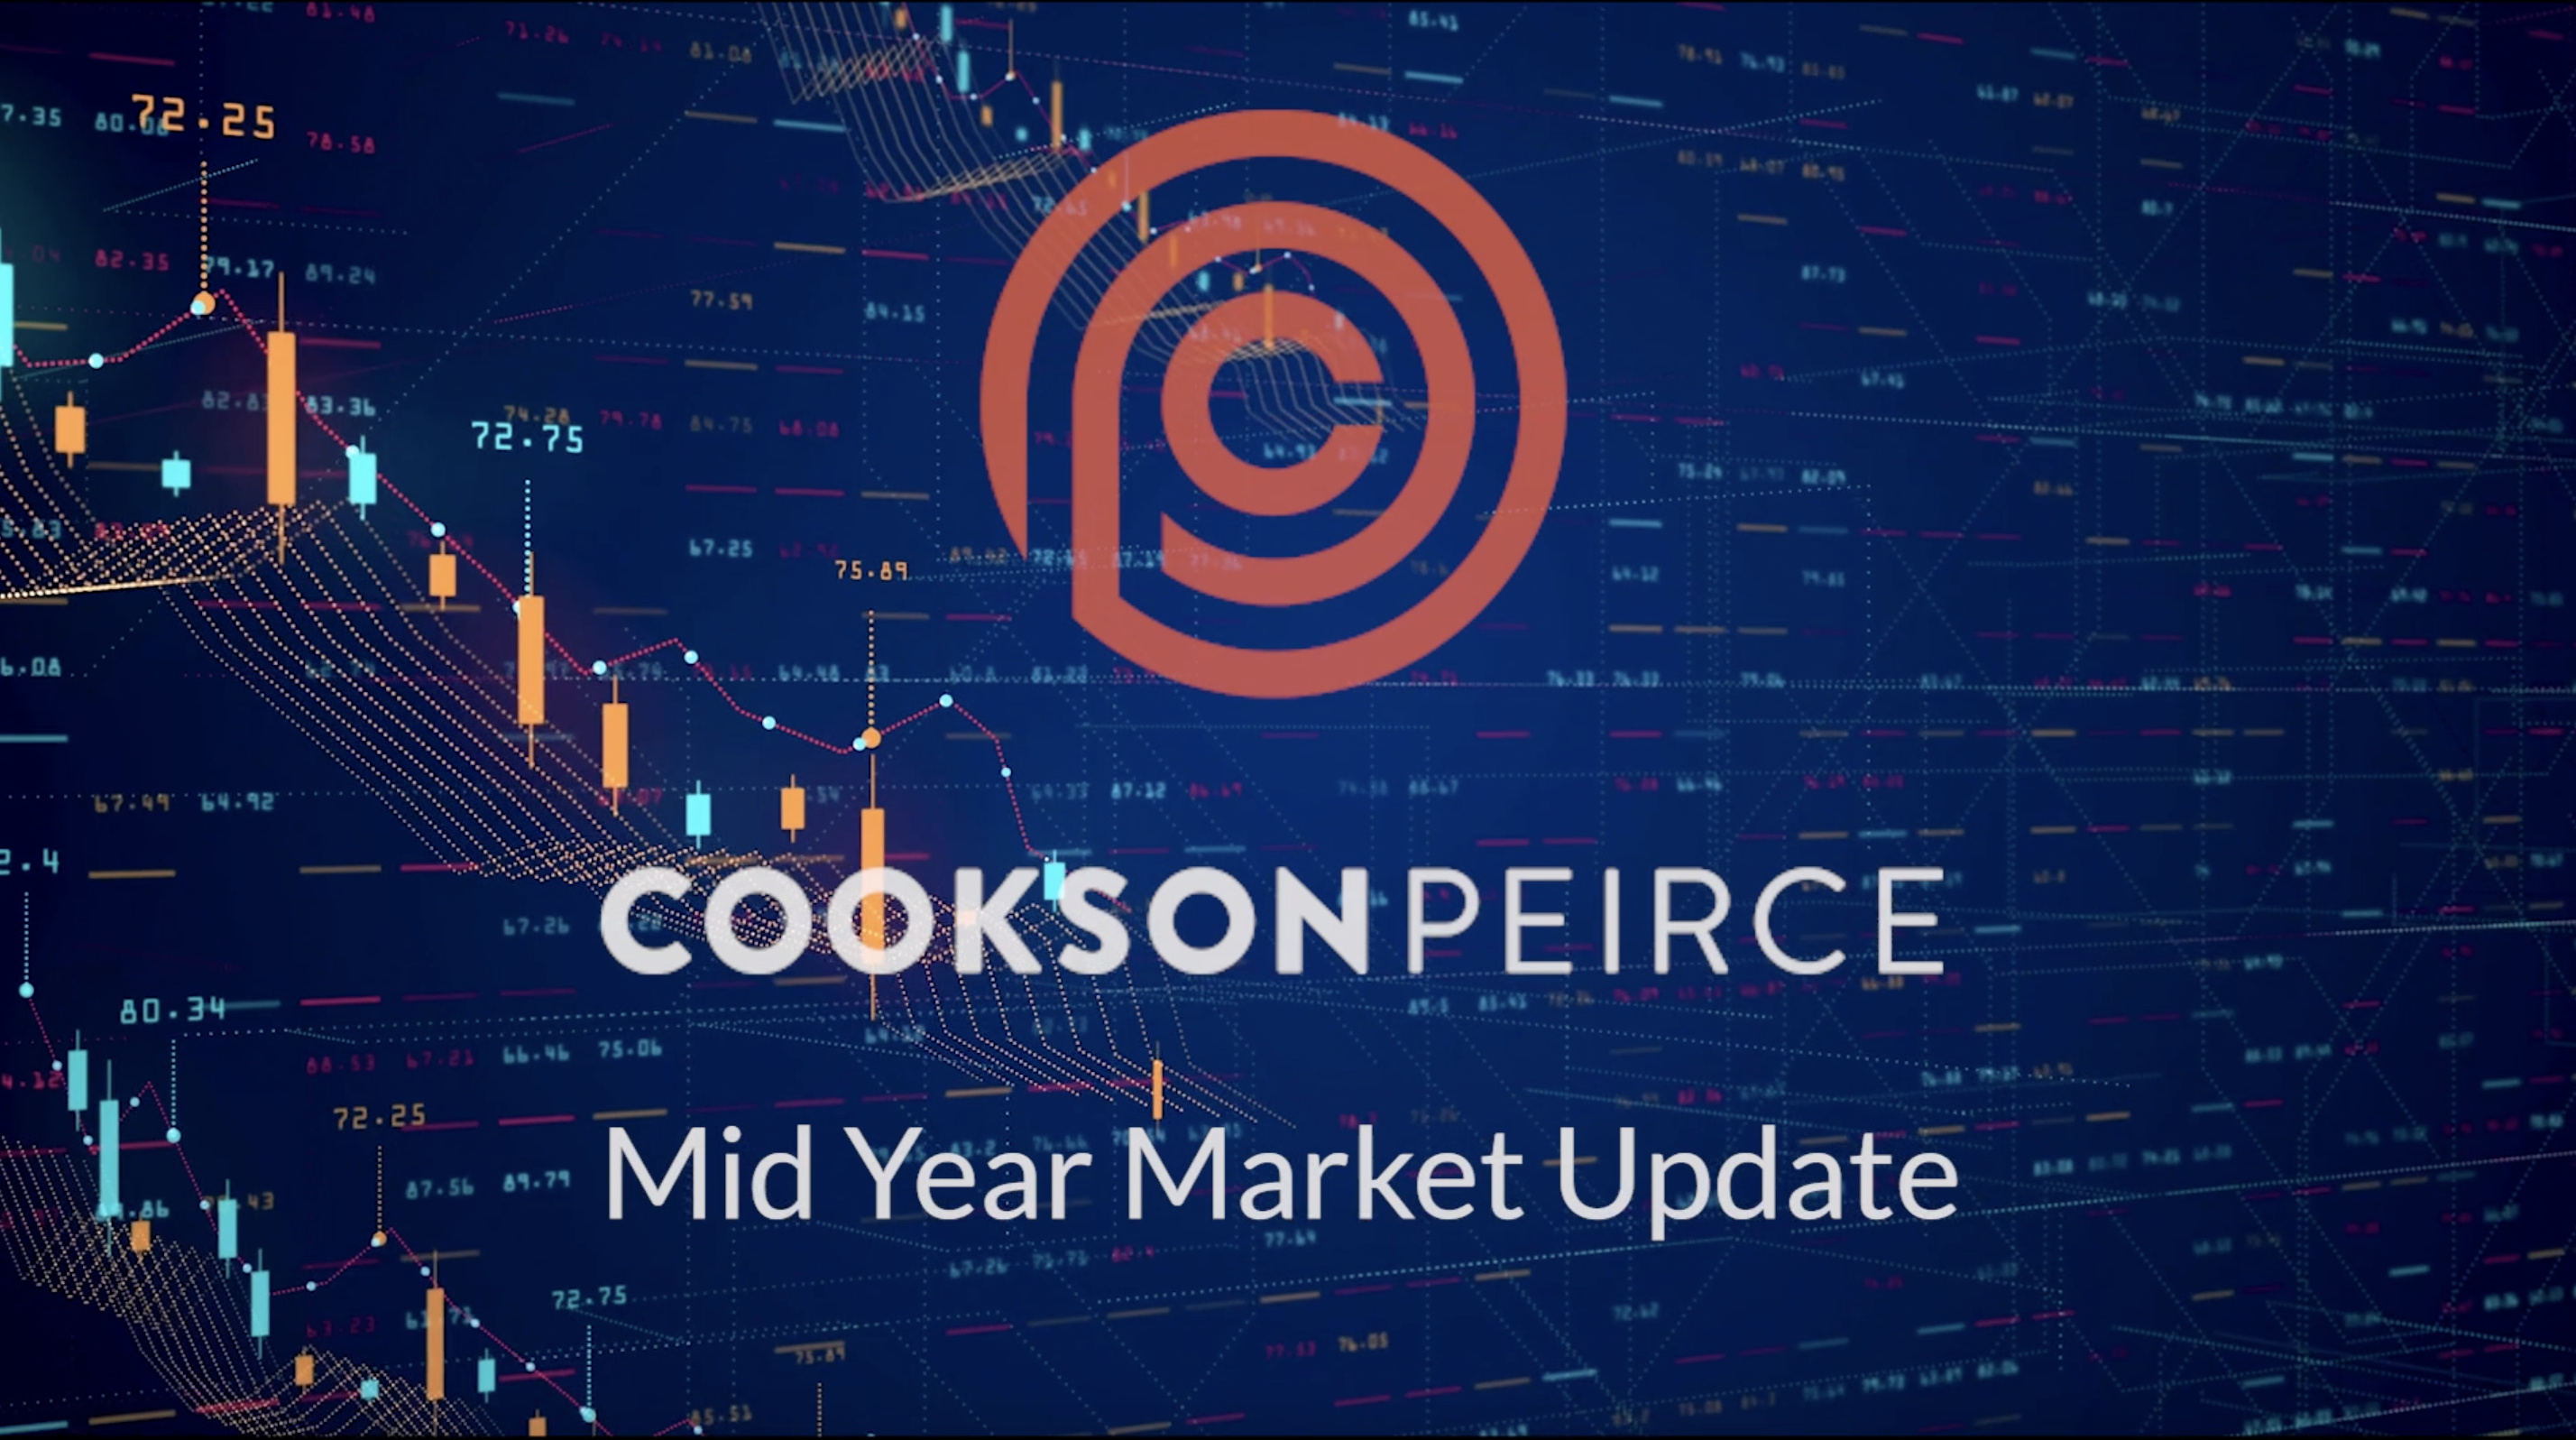 CooksonPeirce Mid Year Market Update